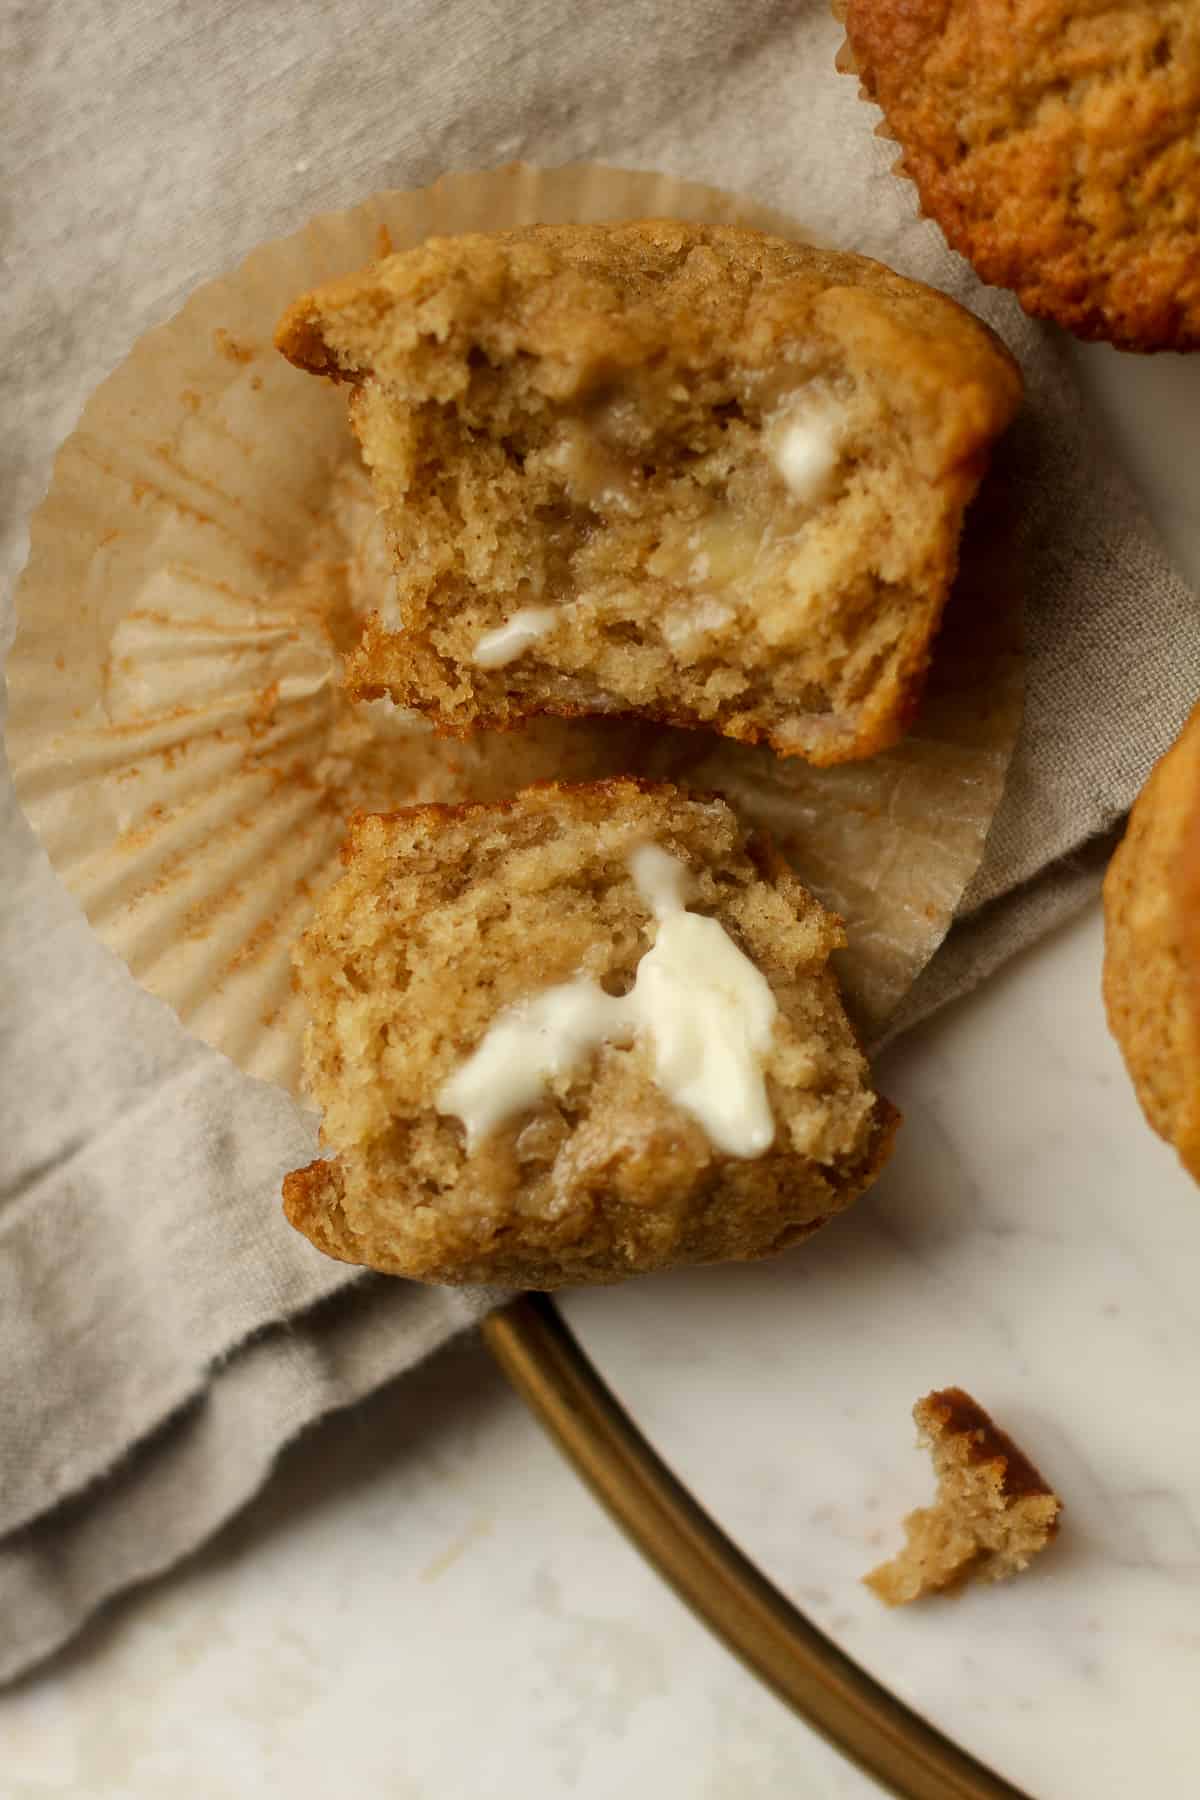 Overhead view of a banana muffin torn in half with butter.